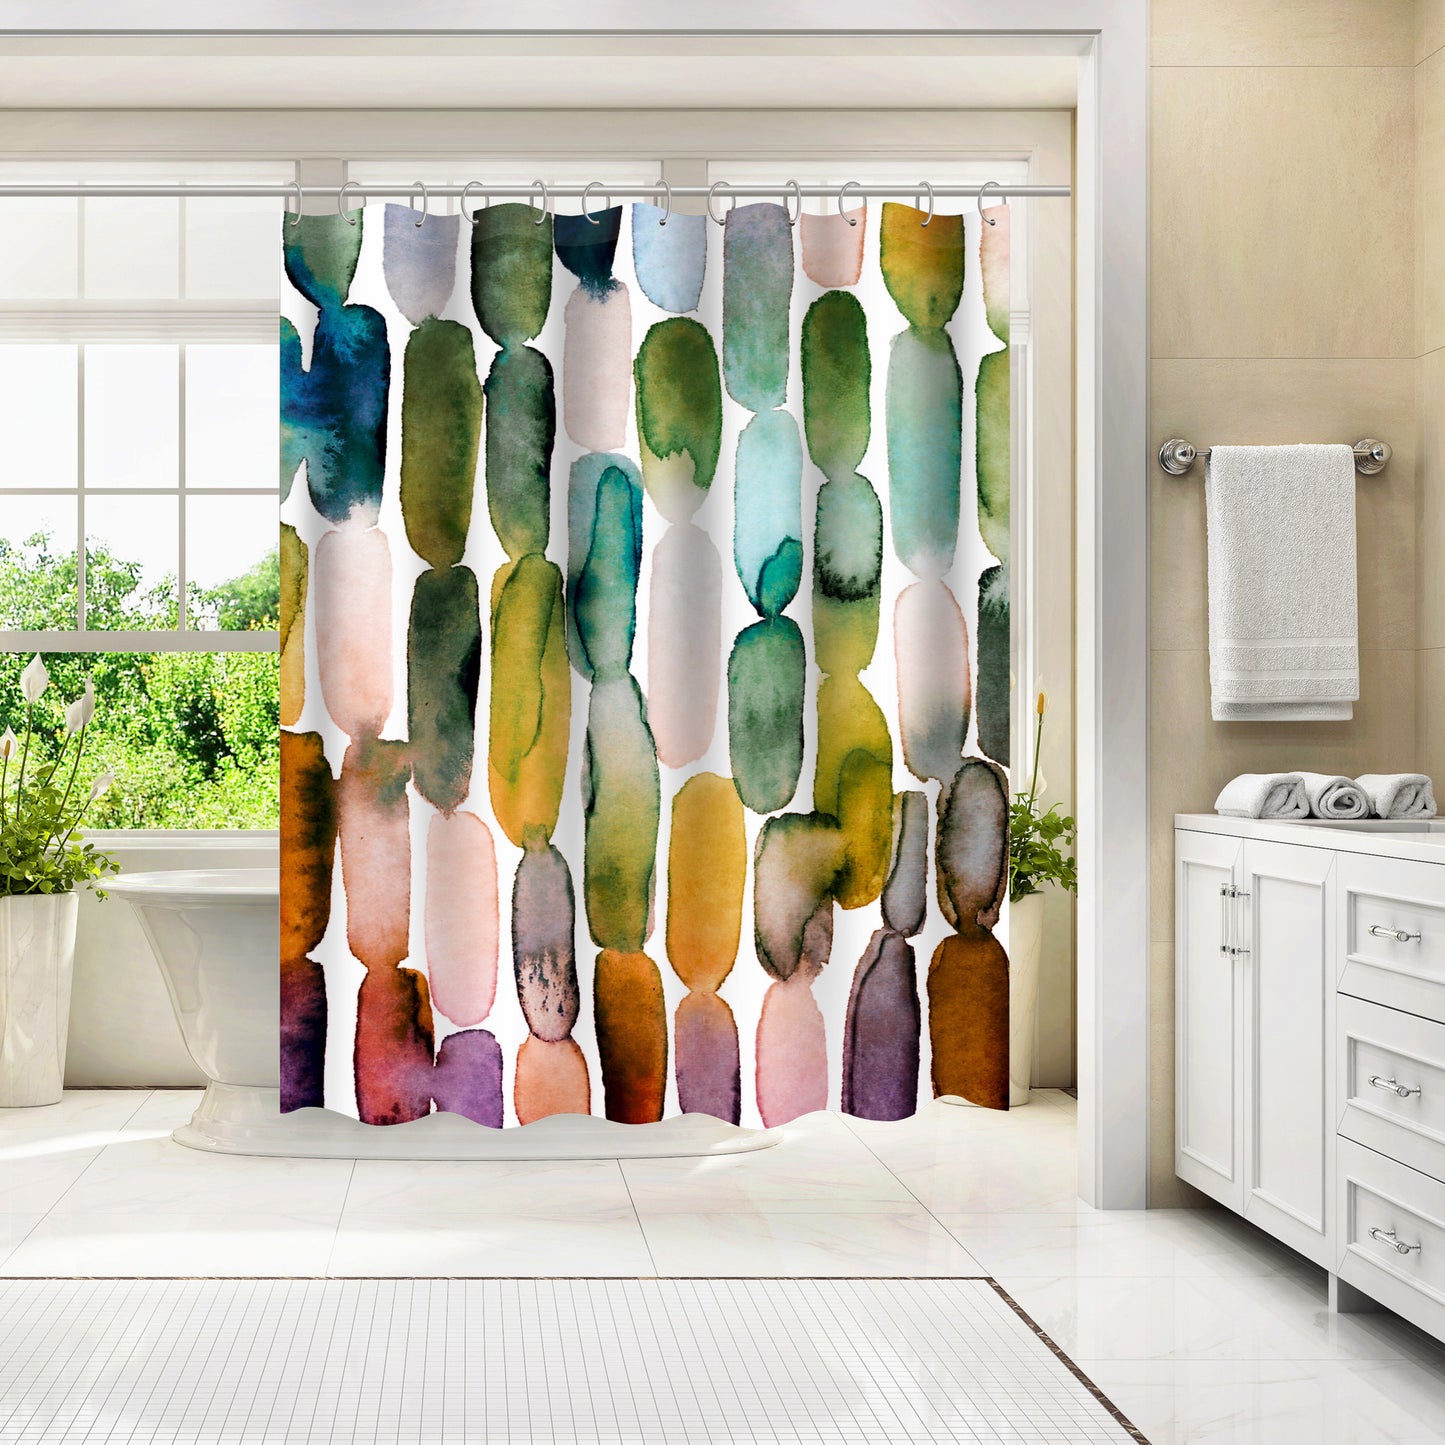 71" x 74" Shower Curtain, Watercolor Strokes 1 by Lisa Nohren